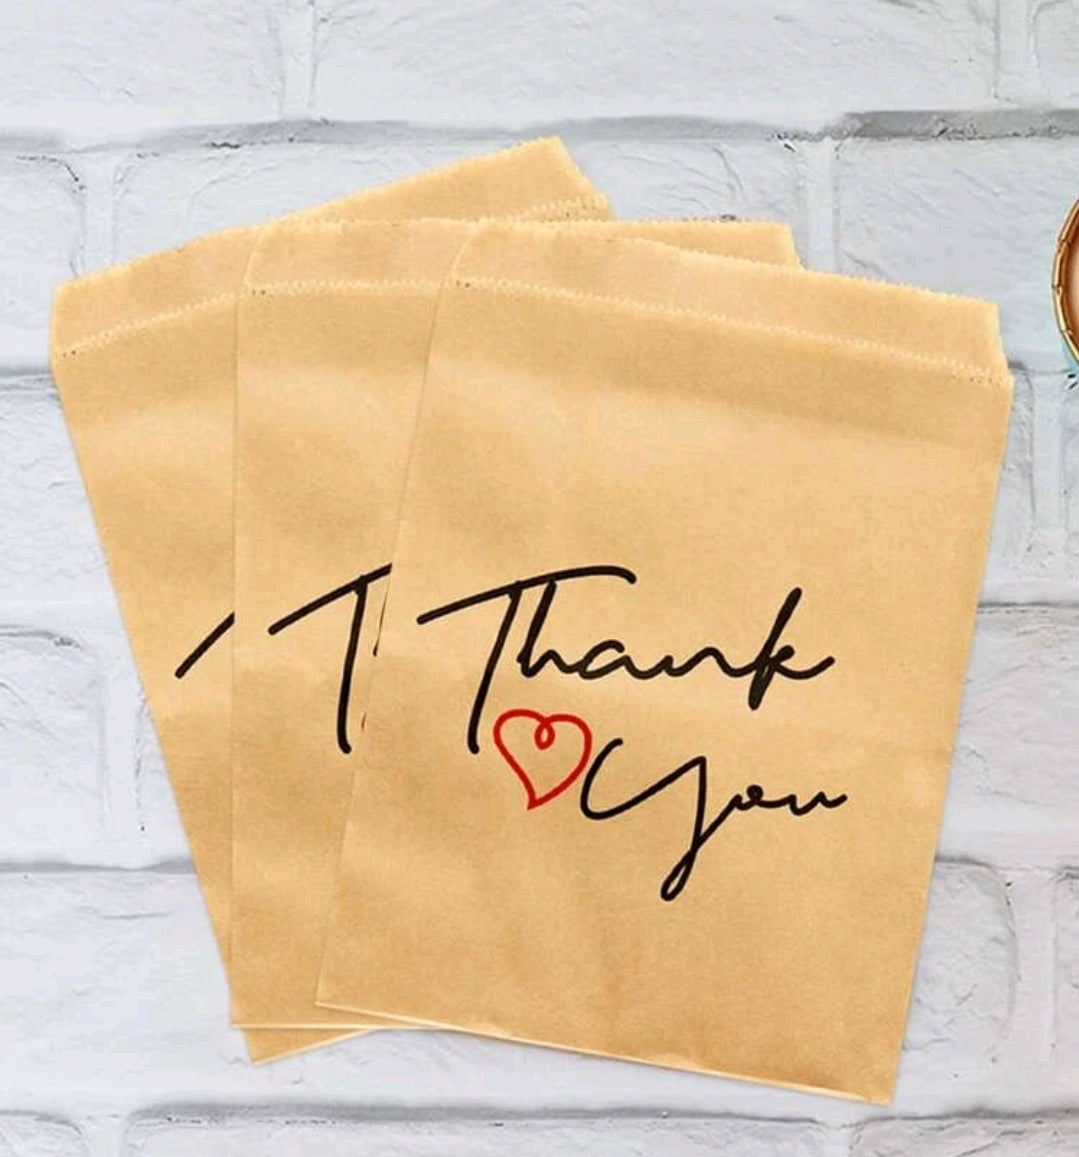 Thank you craft paper bags 4x6in + stickers